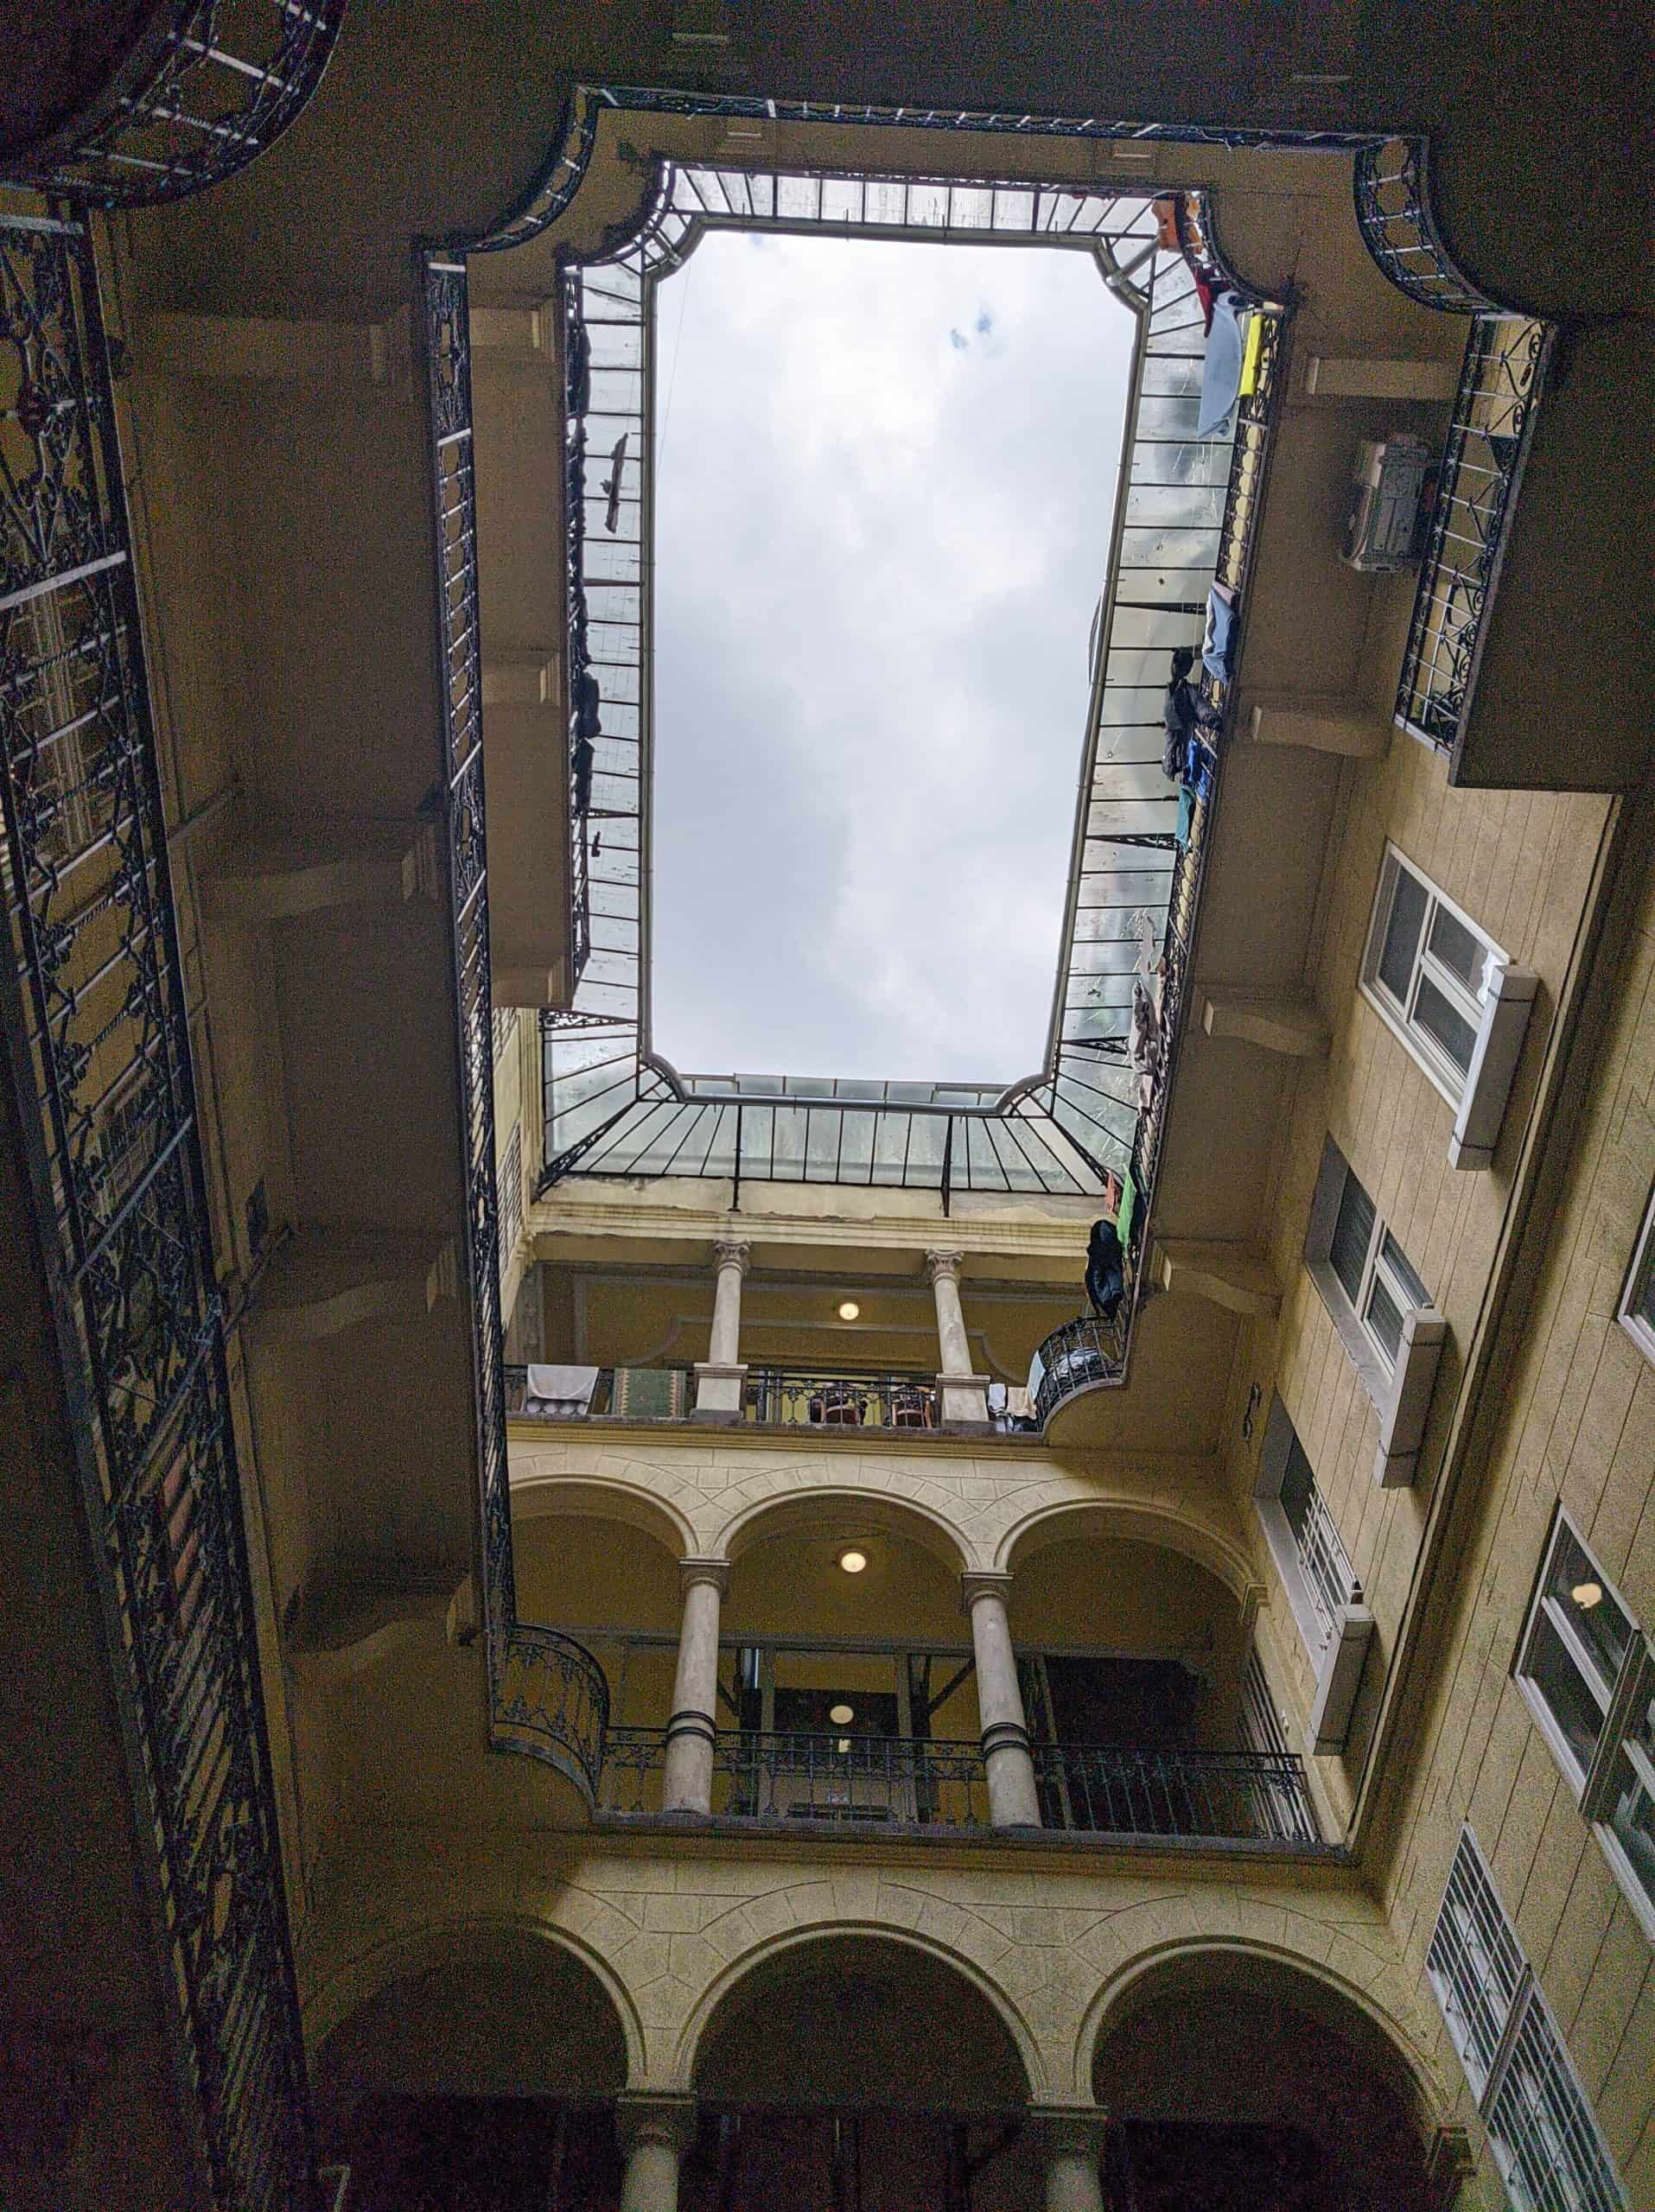 The view up through the courtyard